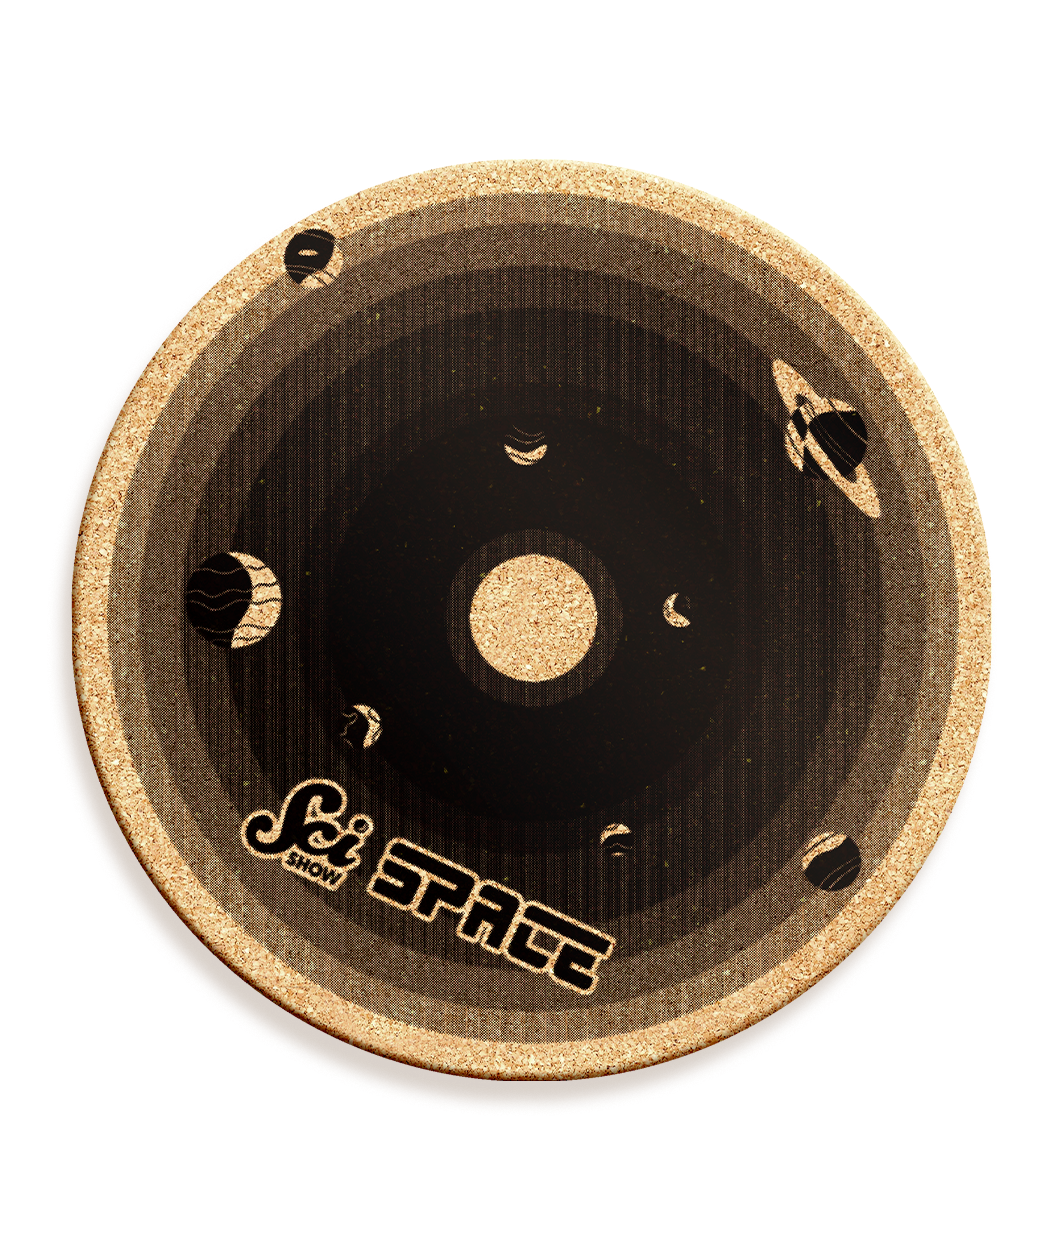 A round cork board with shades of black, showing the different planets. It says 